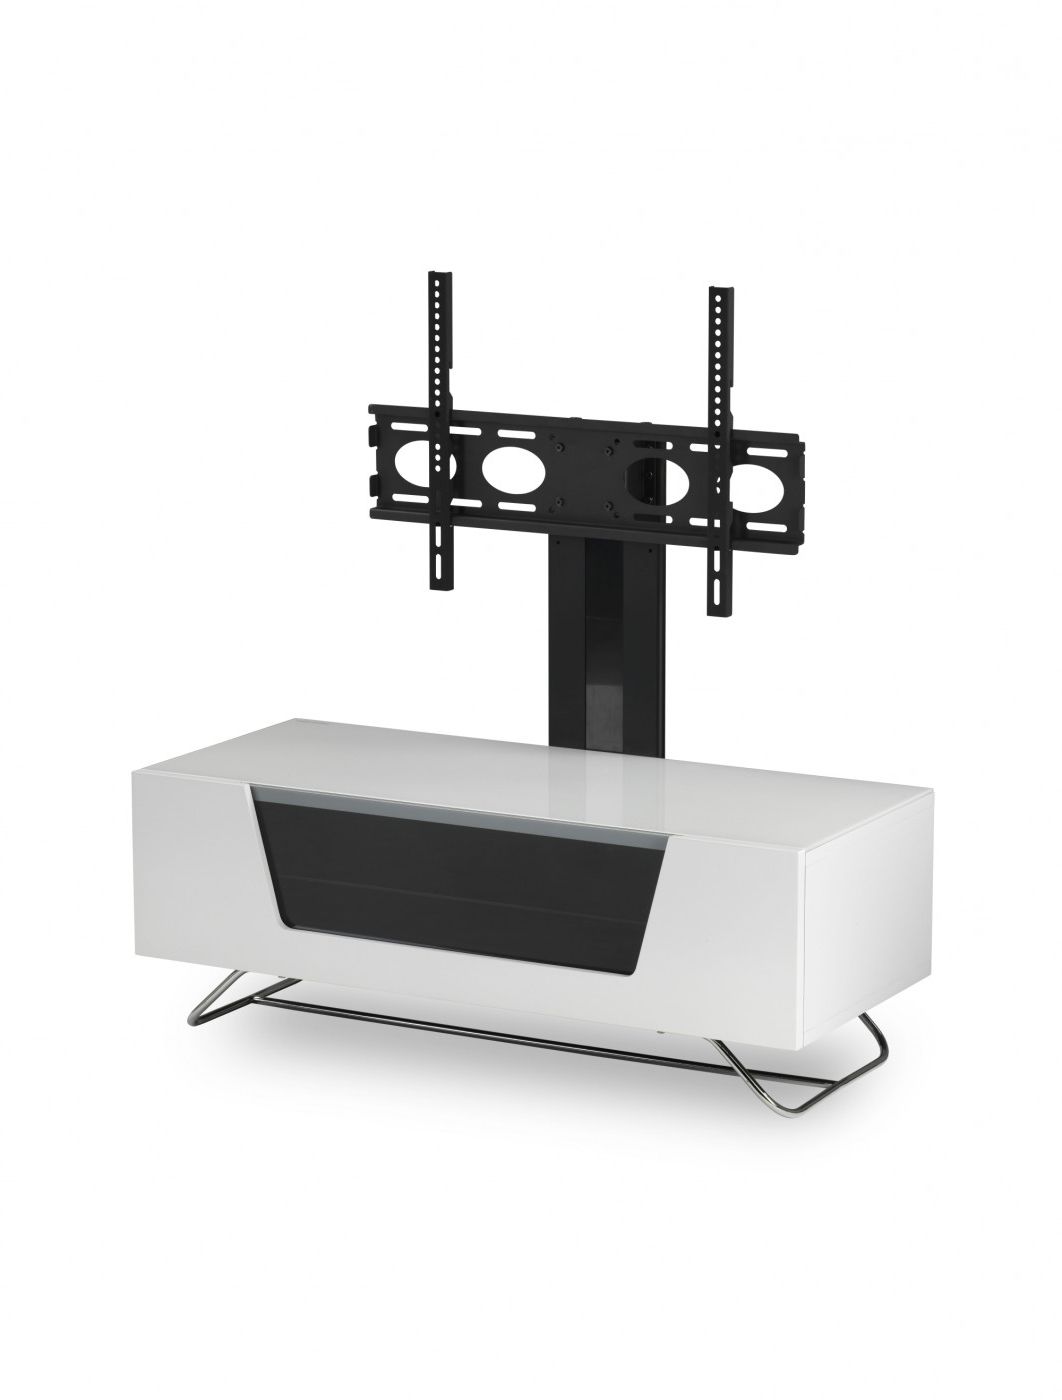 Tv Stand Cantilever Intended For Famous Alphason Chromium Cantilever Tv Stand Cro2 1200bkt Wh (View 18 of 20)